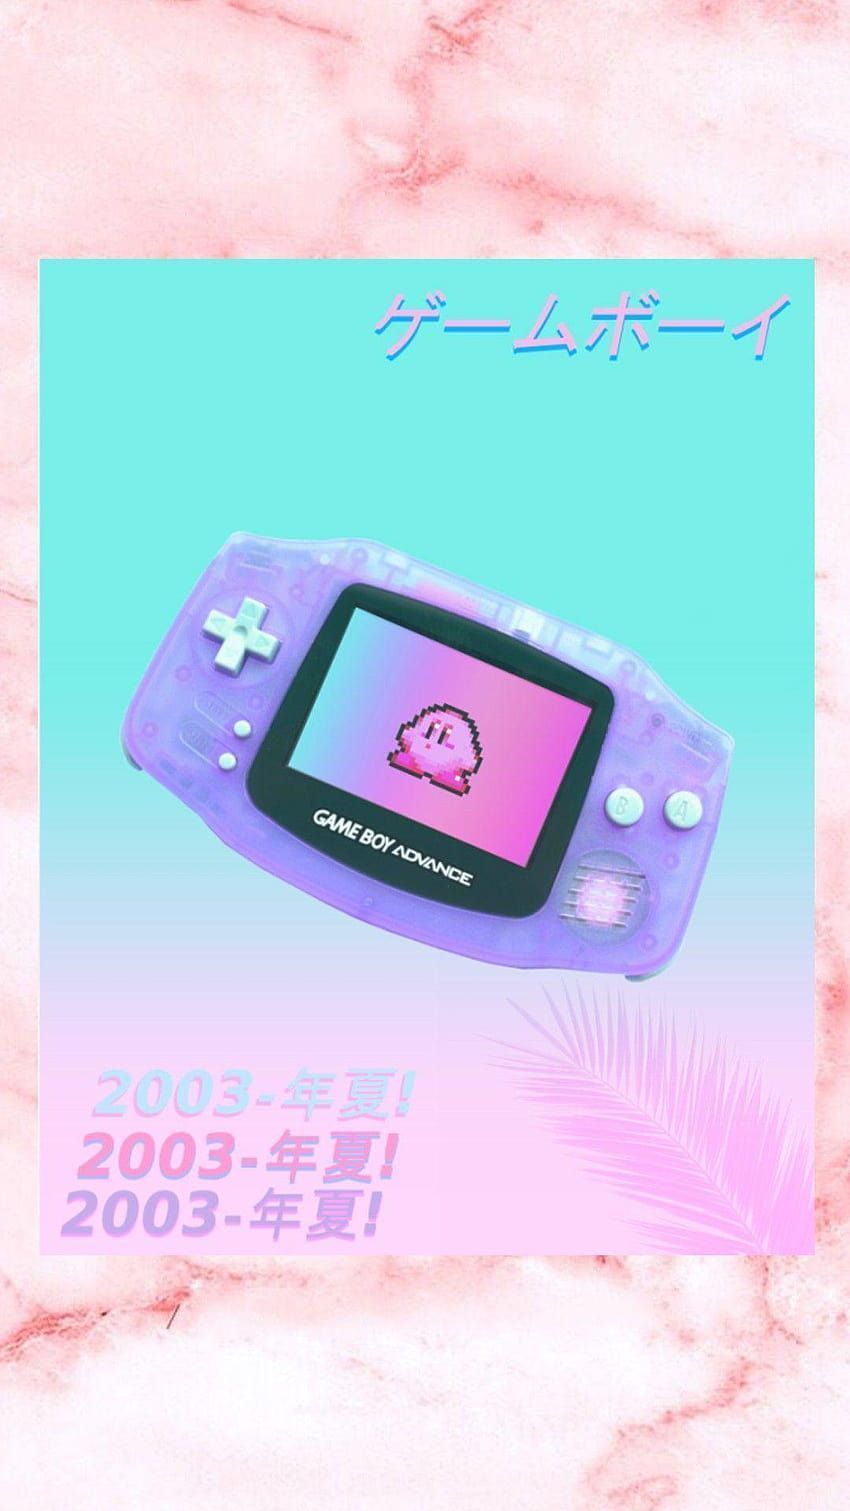 A Gameboy Advance with a pink and blue gradient background - Game Boy